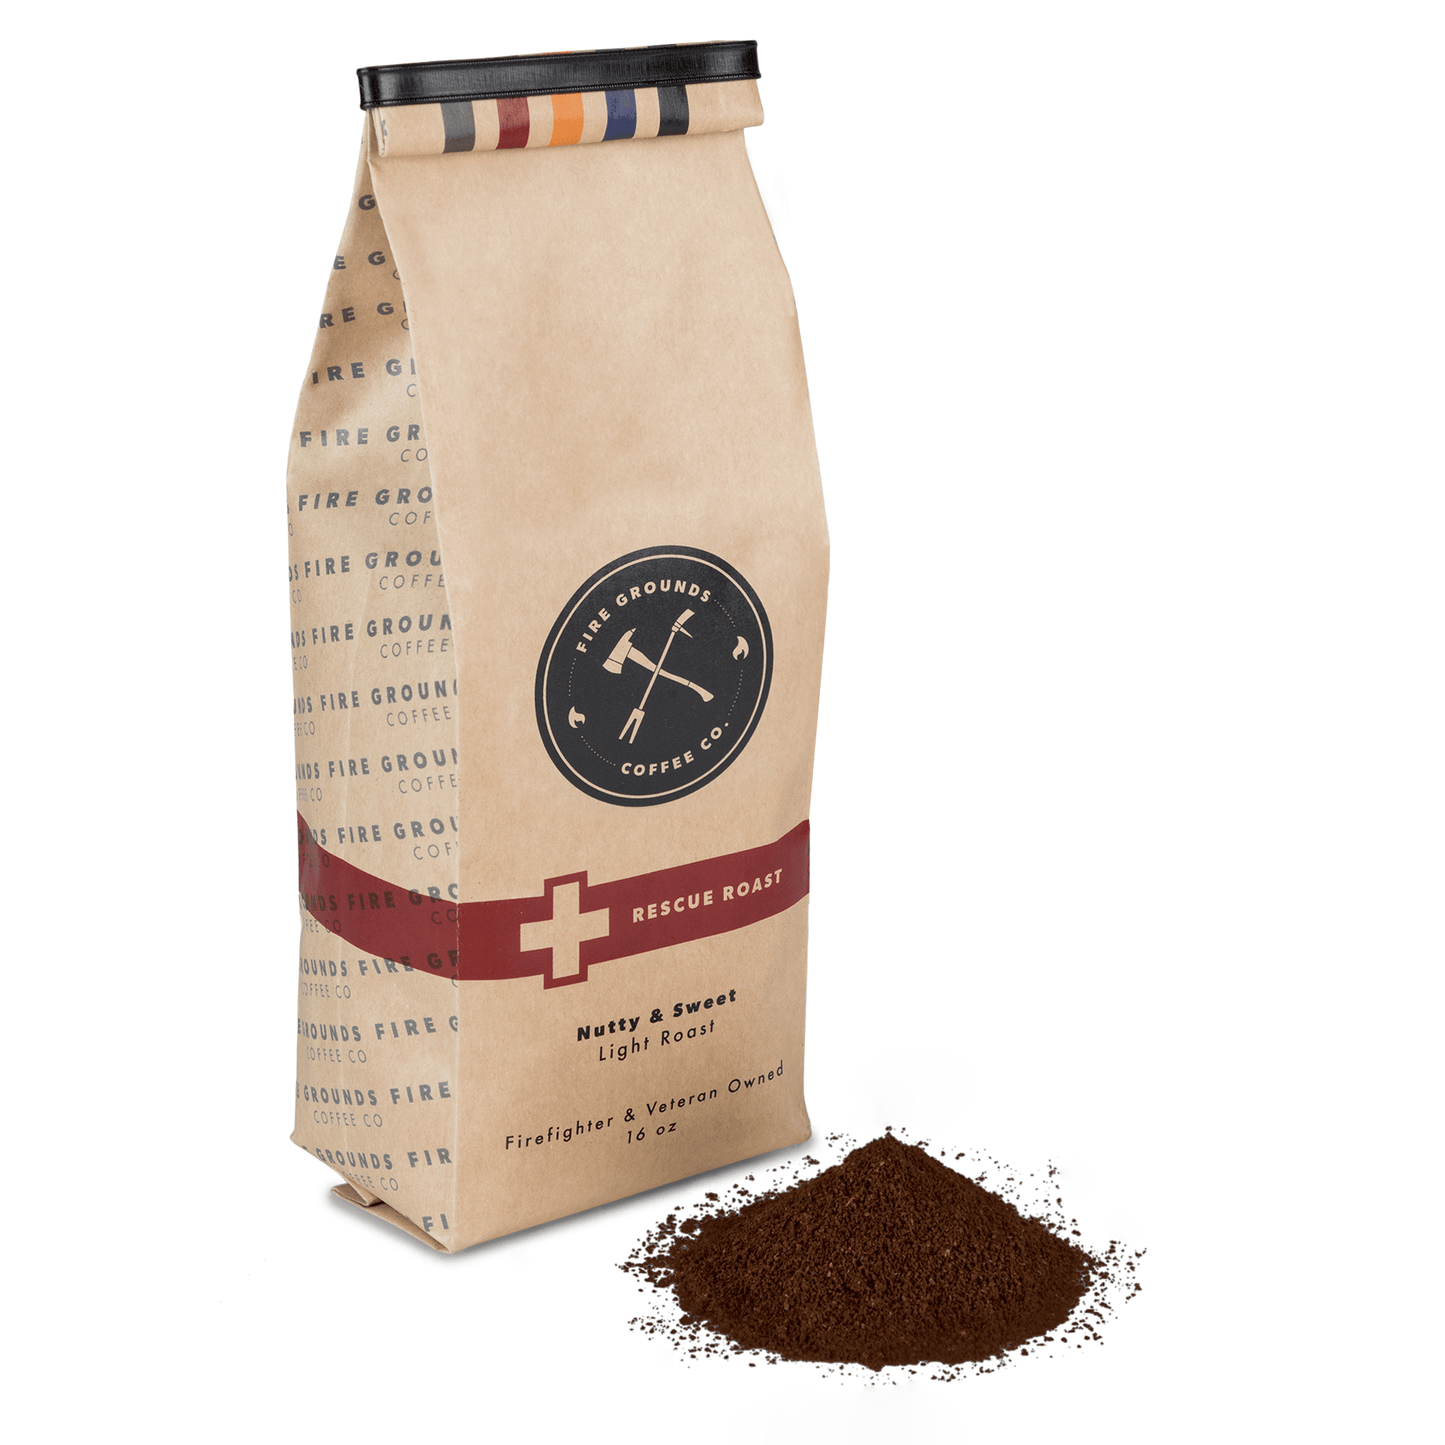 RESCUE ROAST (LIGHT ROAST) by Fire Grounds Coffee Company - The Hammer Sports